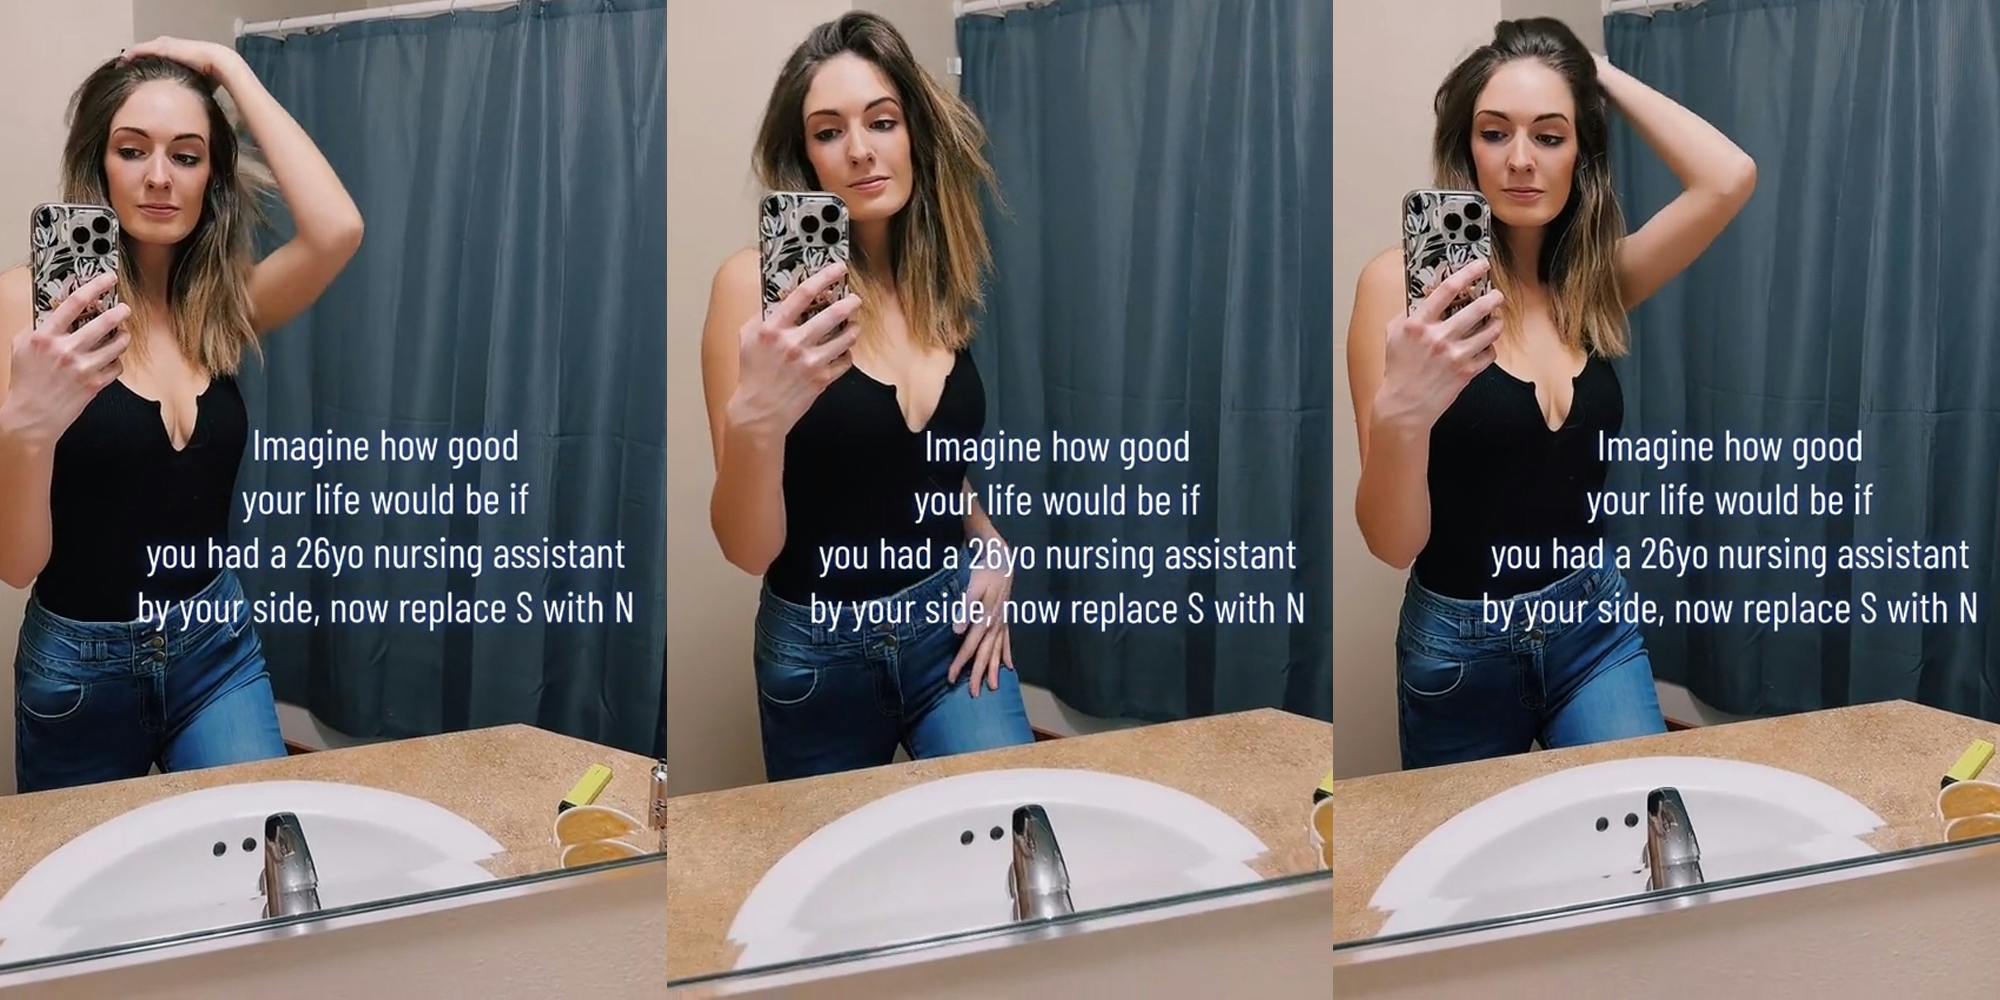 woman posing in mirror caption "Imagine how good your life would be if you had a 26yo nursing assistant by your side, now replace S with N" (l) woman posing in mirror caption "Imagine how good your life would be if you had a 26yo nursing assistant tiktok by your side, now replace S with N" (c) woman posing in mirror caption "Imagine how good your life would be if you had a 26yo nursing assistant by your side, now replace S with N" (r)